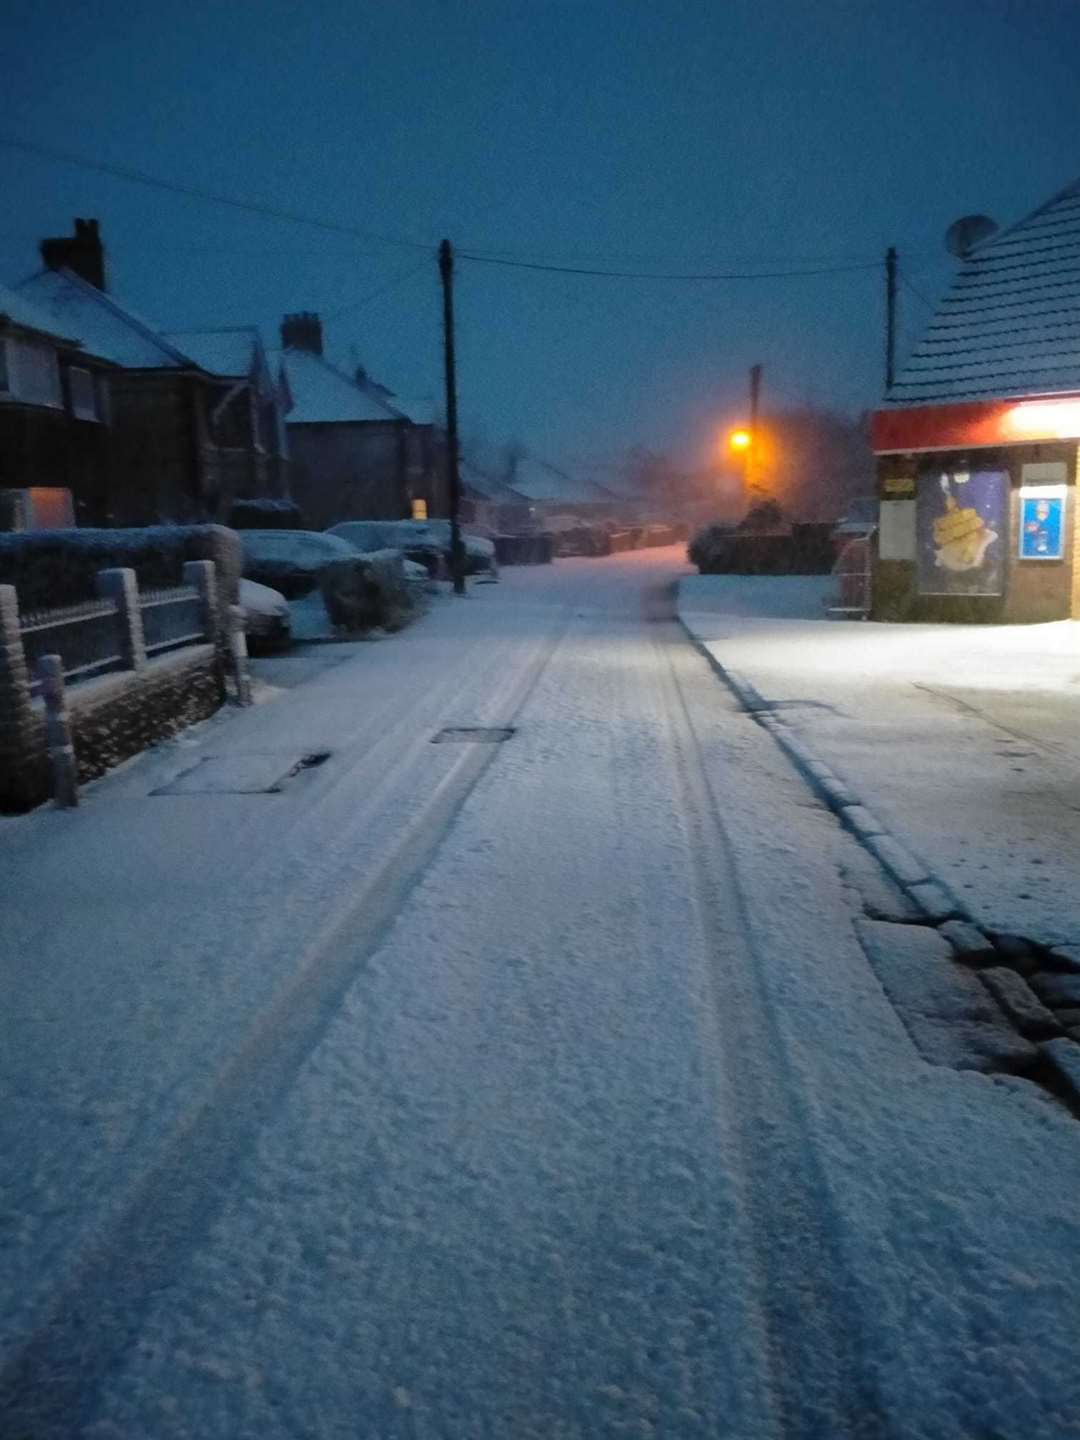 Liam Reid captured this scene in Whitfield early this morning